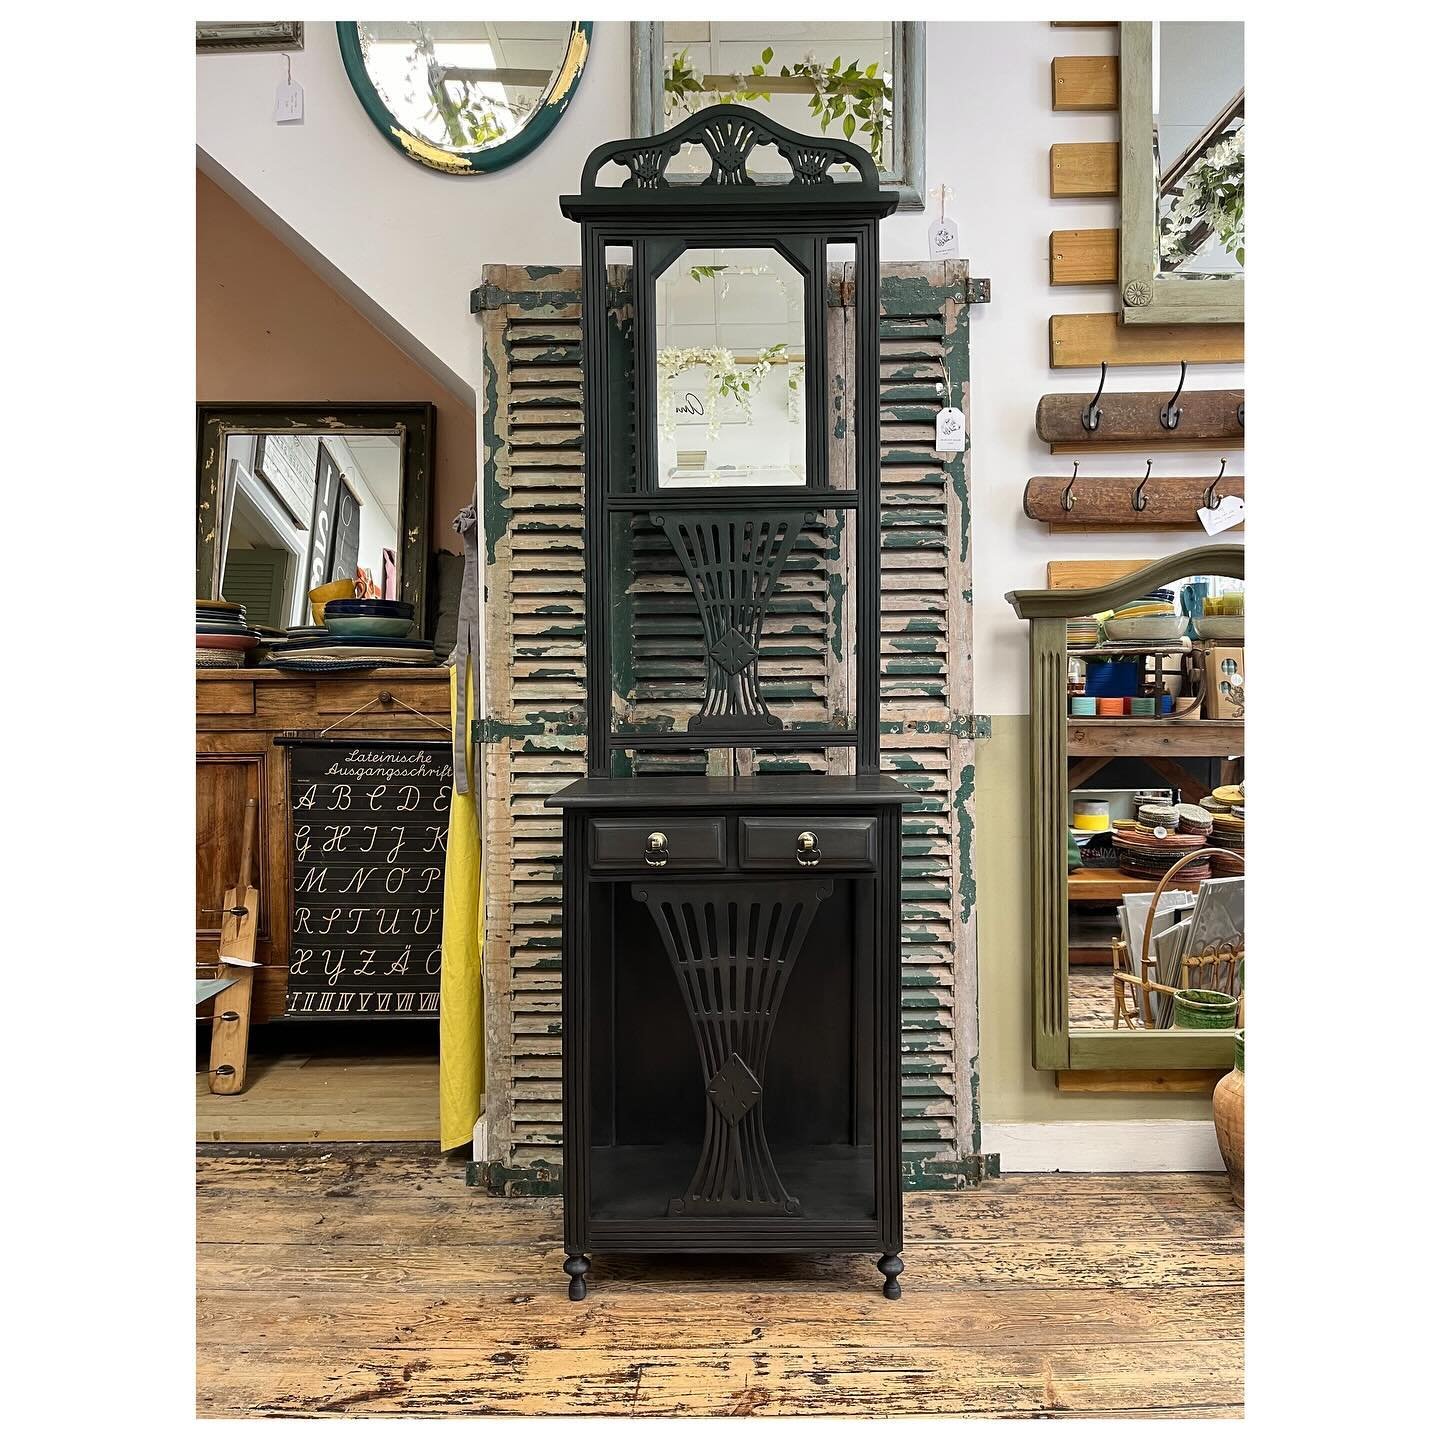 If you&rsquo;re looking for a stand out piece of furniture for your hall or entrance way, this could be it!☝🏼

This wonderful vintage hallway stand has been hand painted in an ombre style using Annie Sloan Amsterdam Green at the top and blending dow